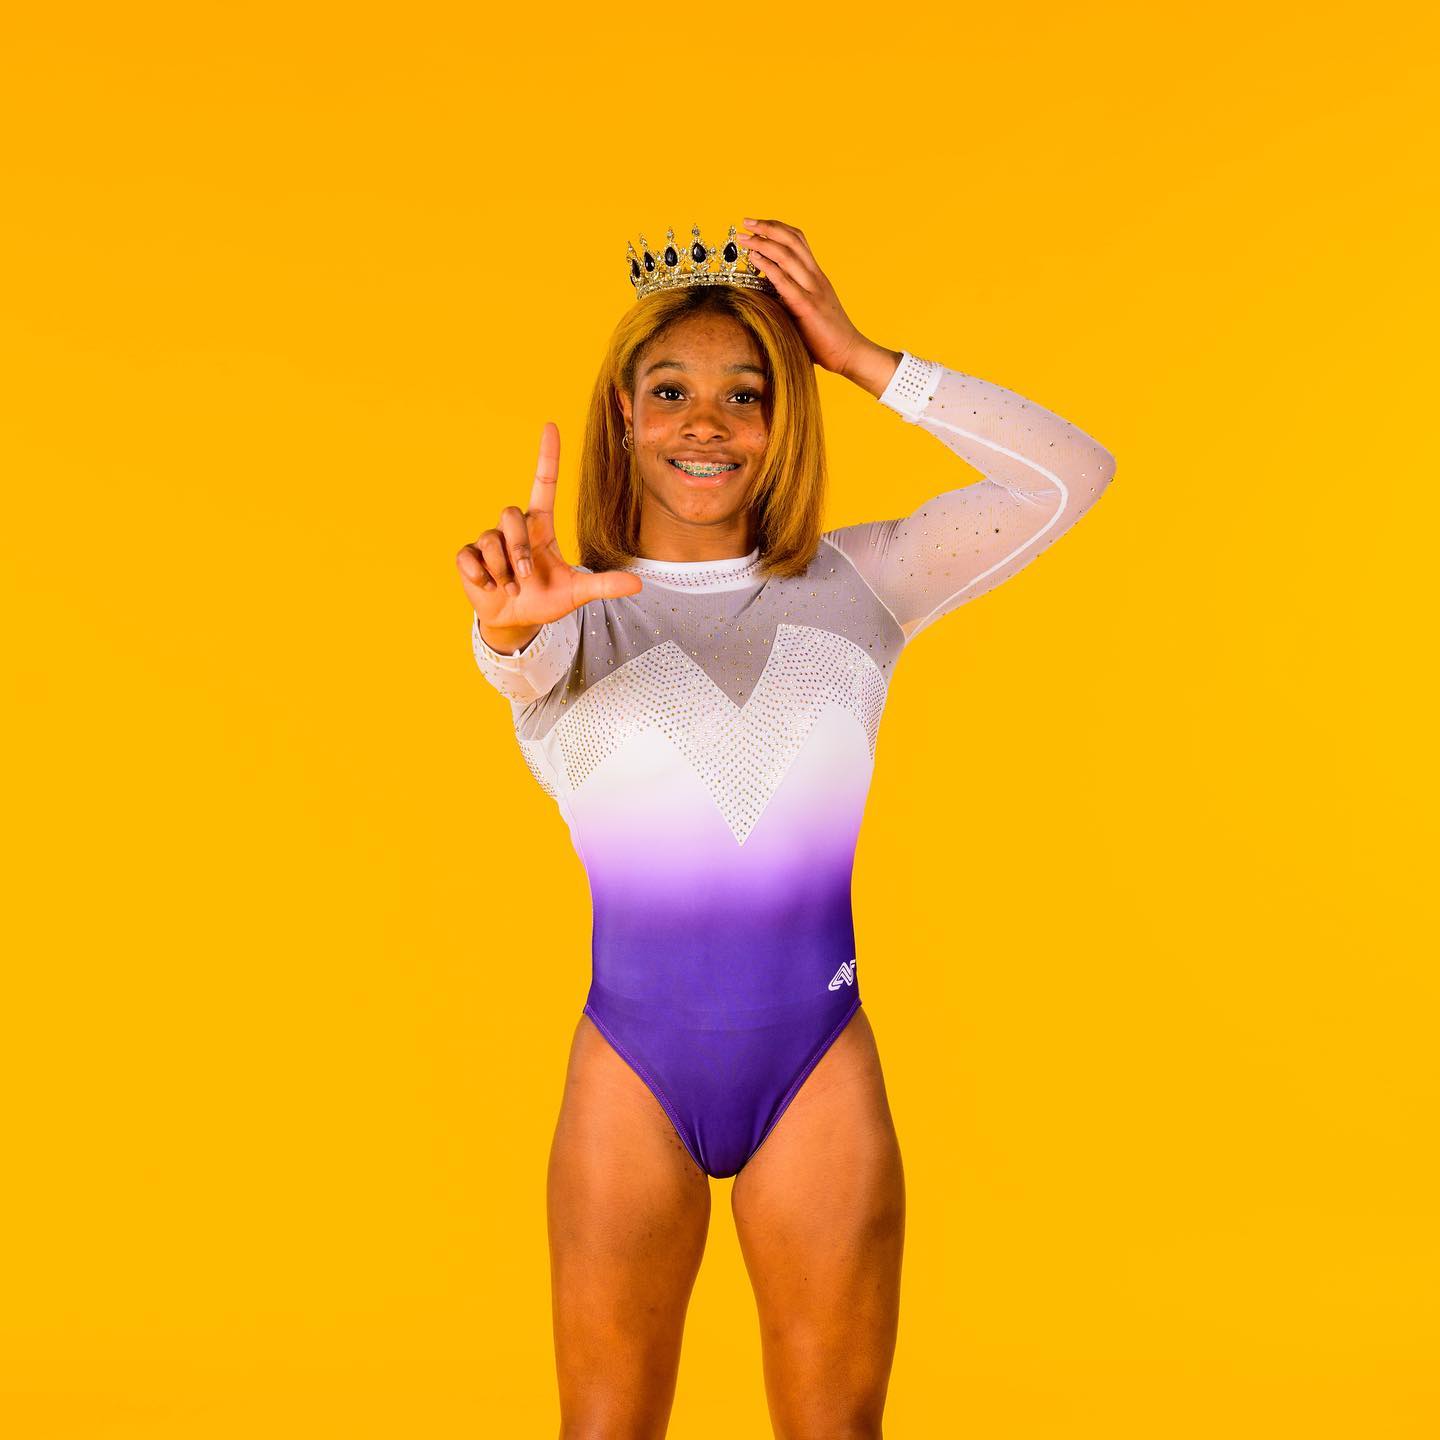 LSU gymnastics commit Kaliya Lincoln wearing a crown while showing an “L” with her right hand